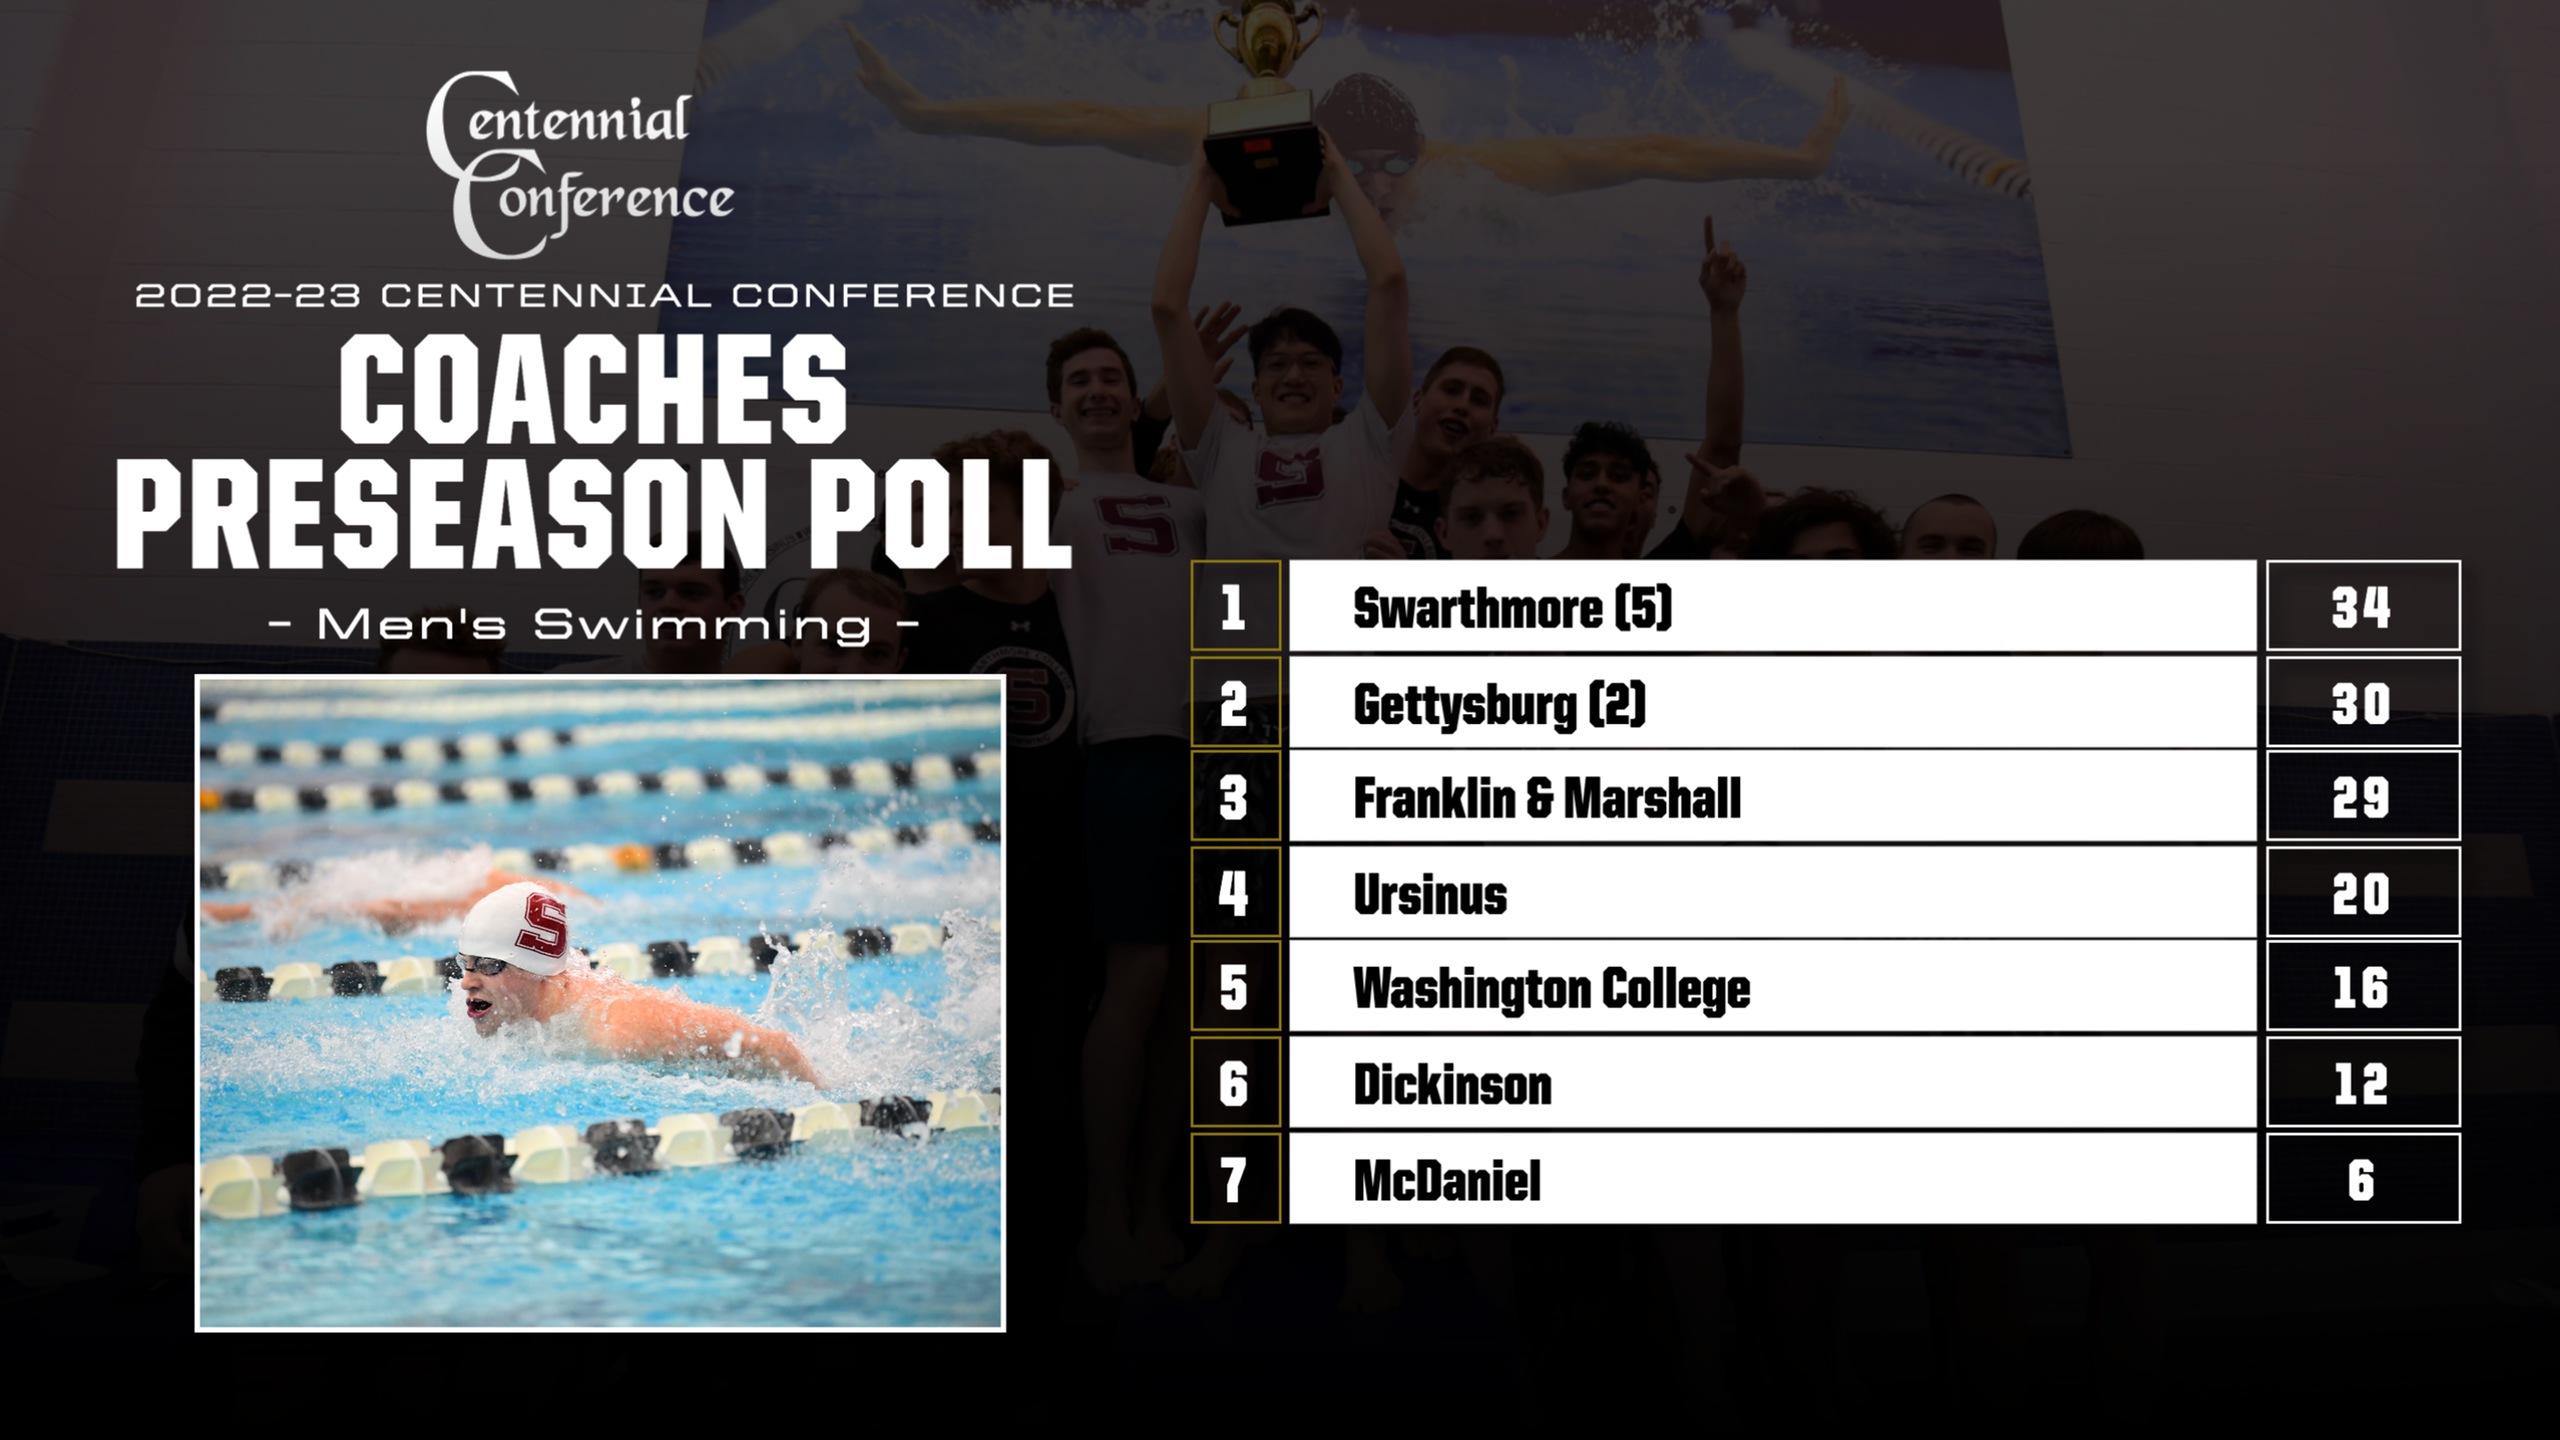 Swarthmore Picked to Repeat in Men's Swimming Poll